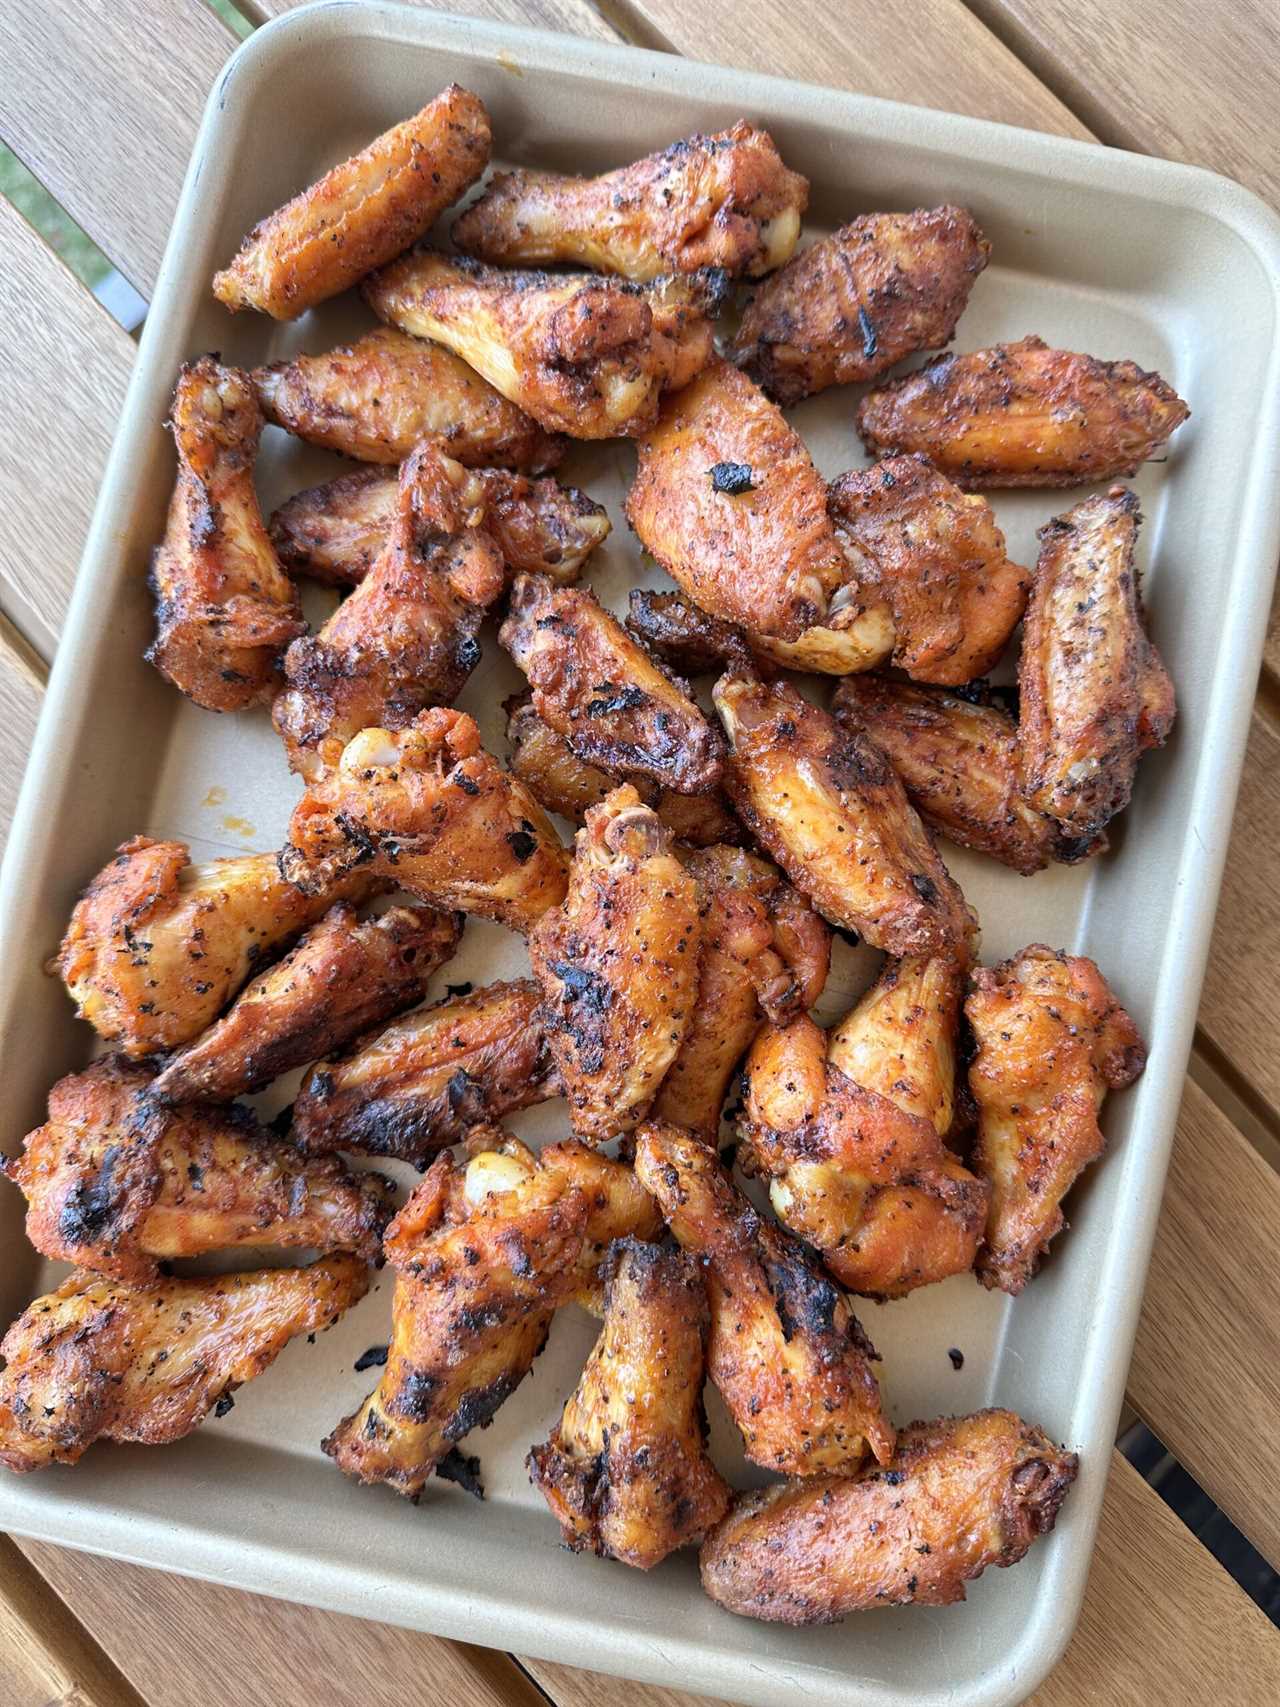 Perfectly grilled wings